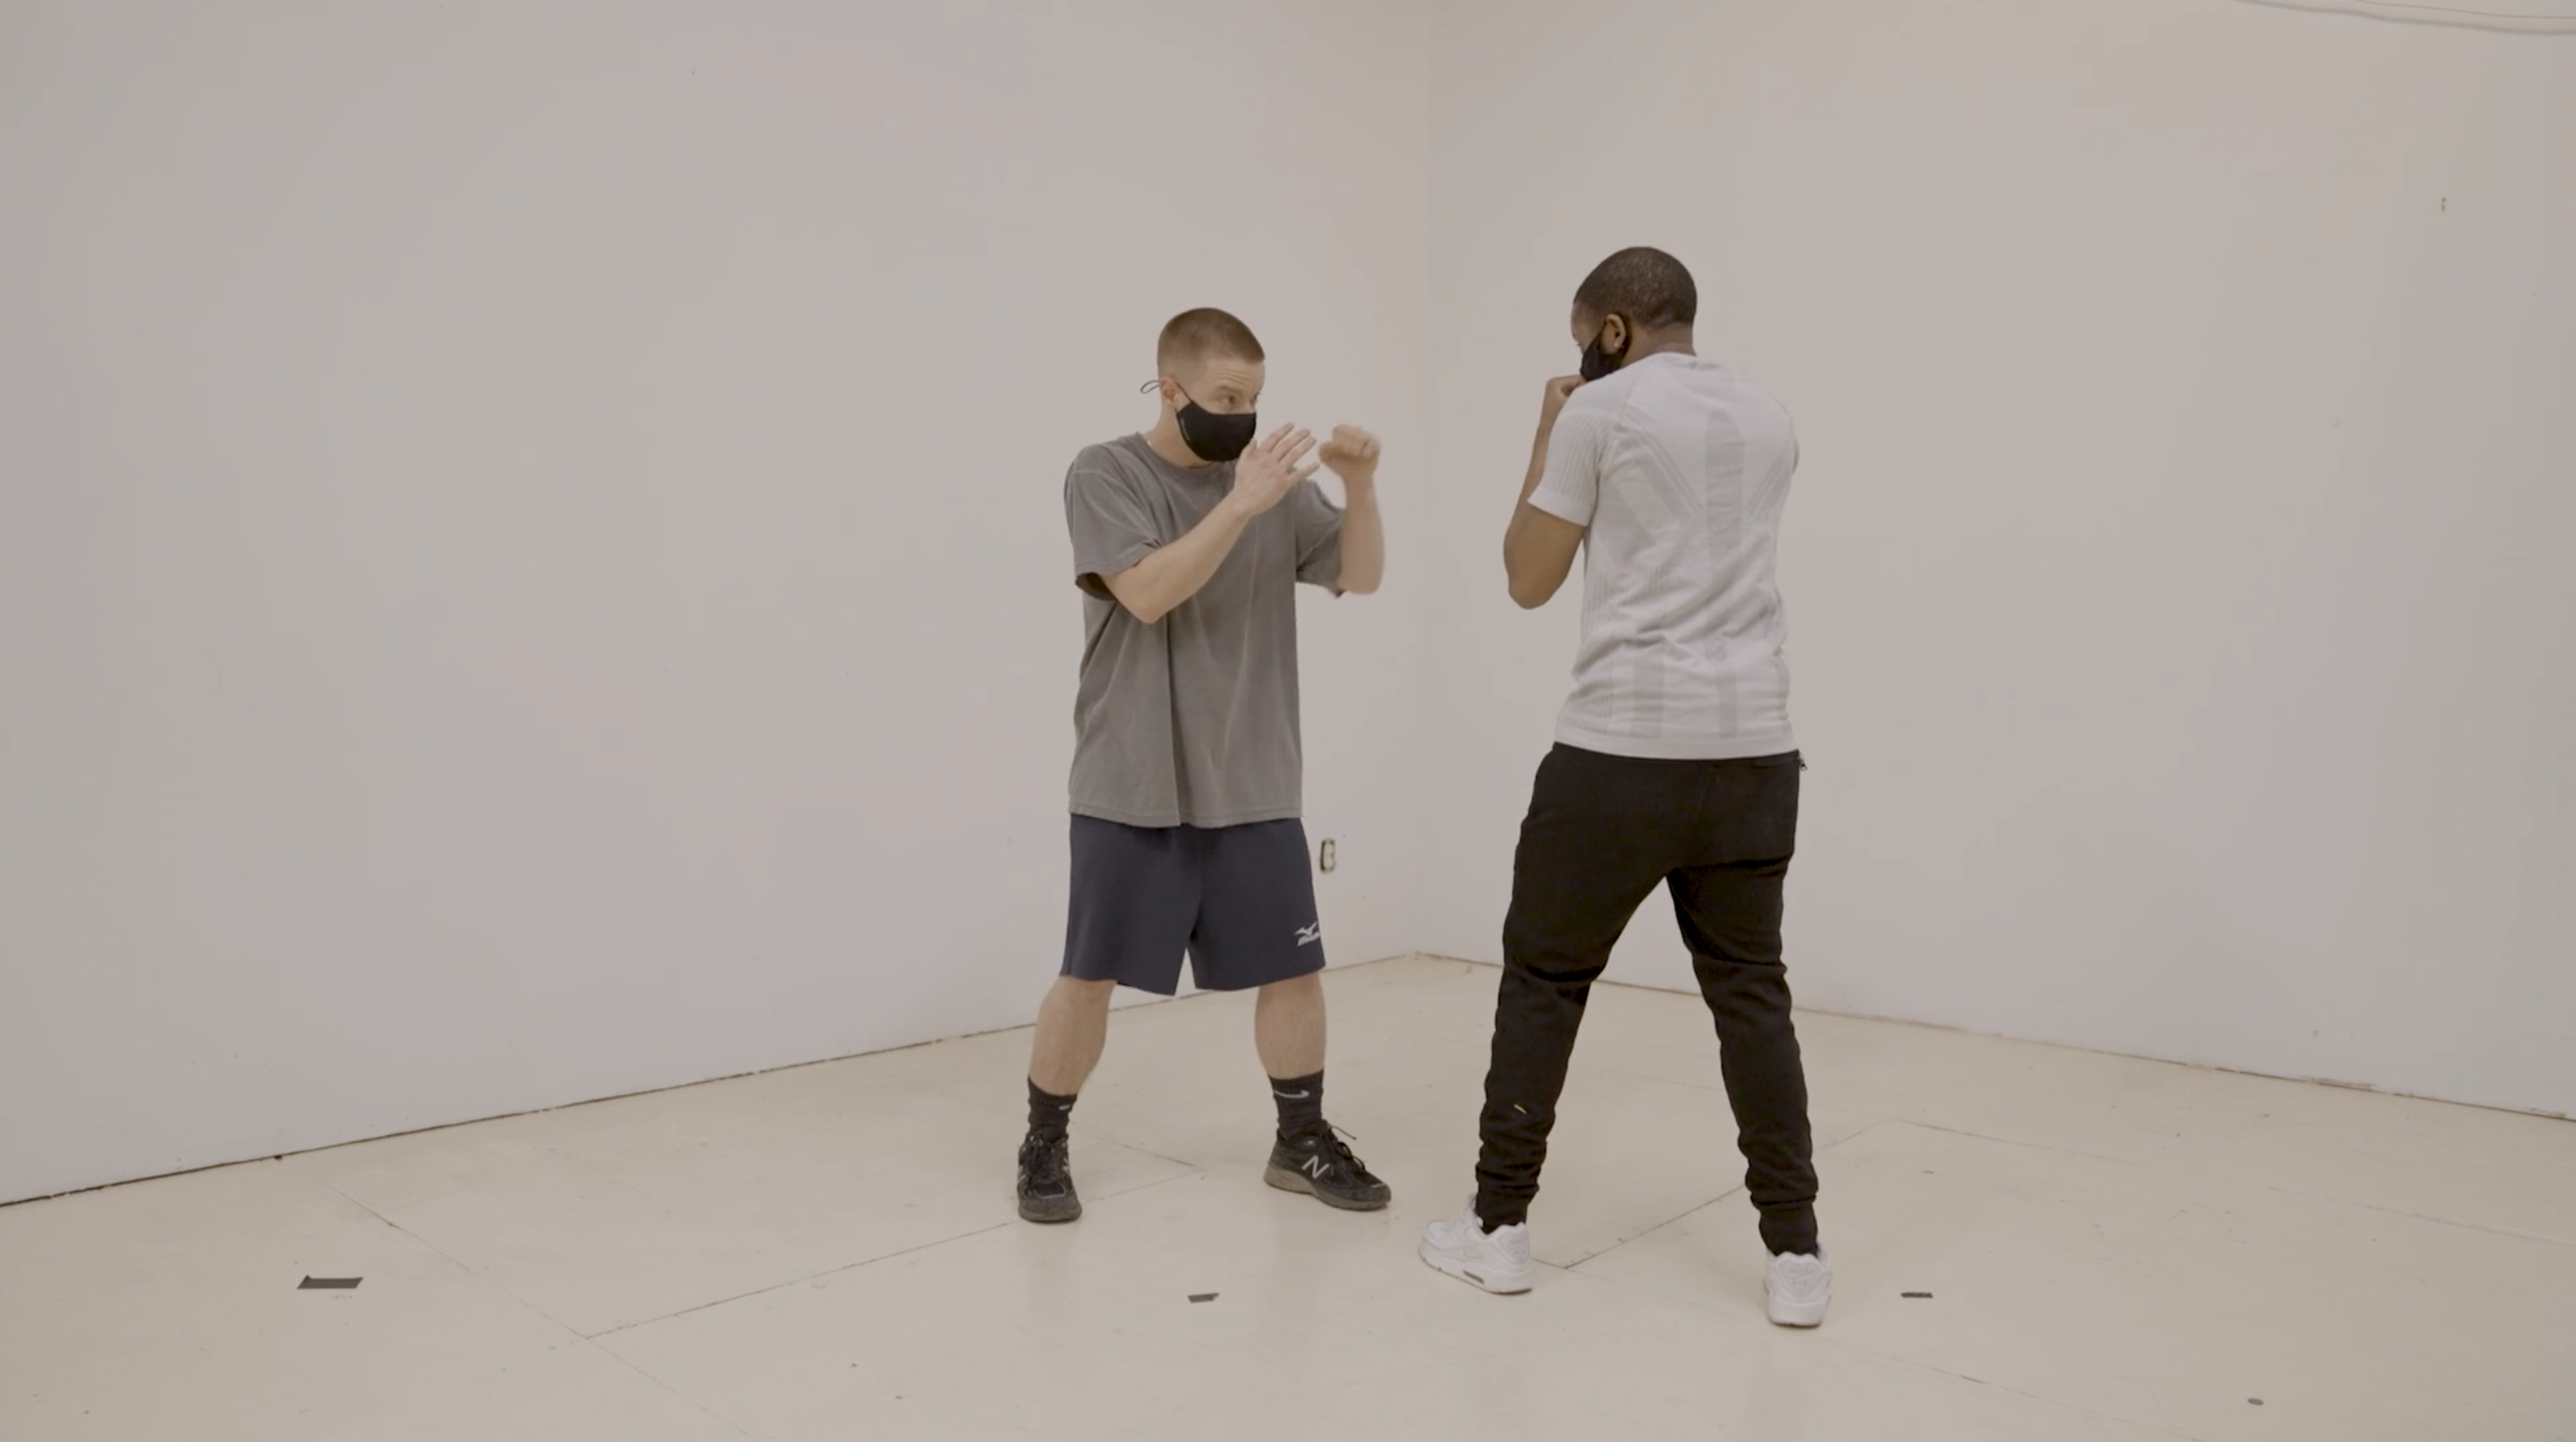 Two people stand in the corner of a white room, each in a boxing stance and wearing face masks.